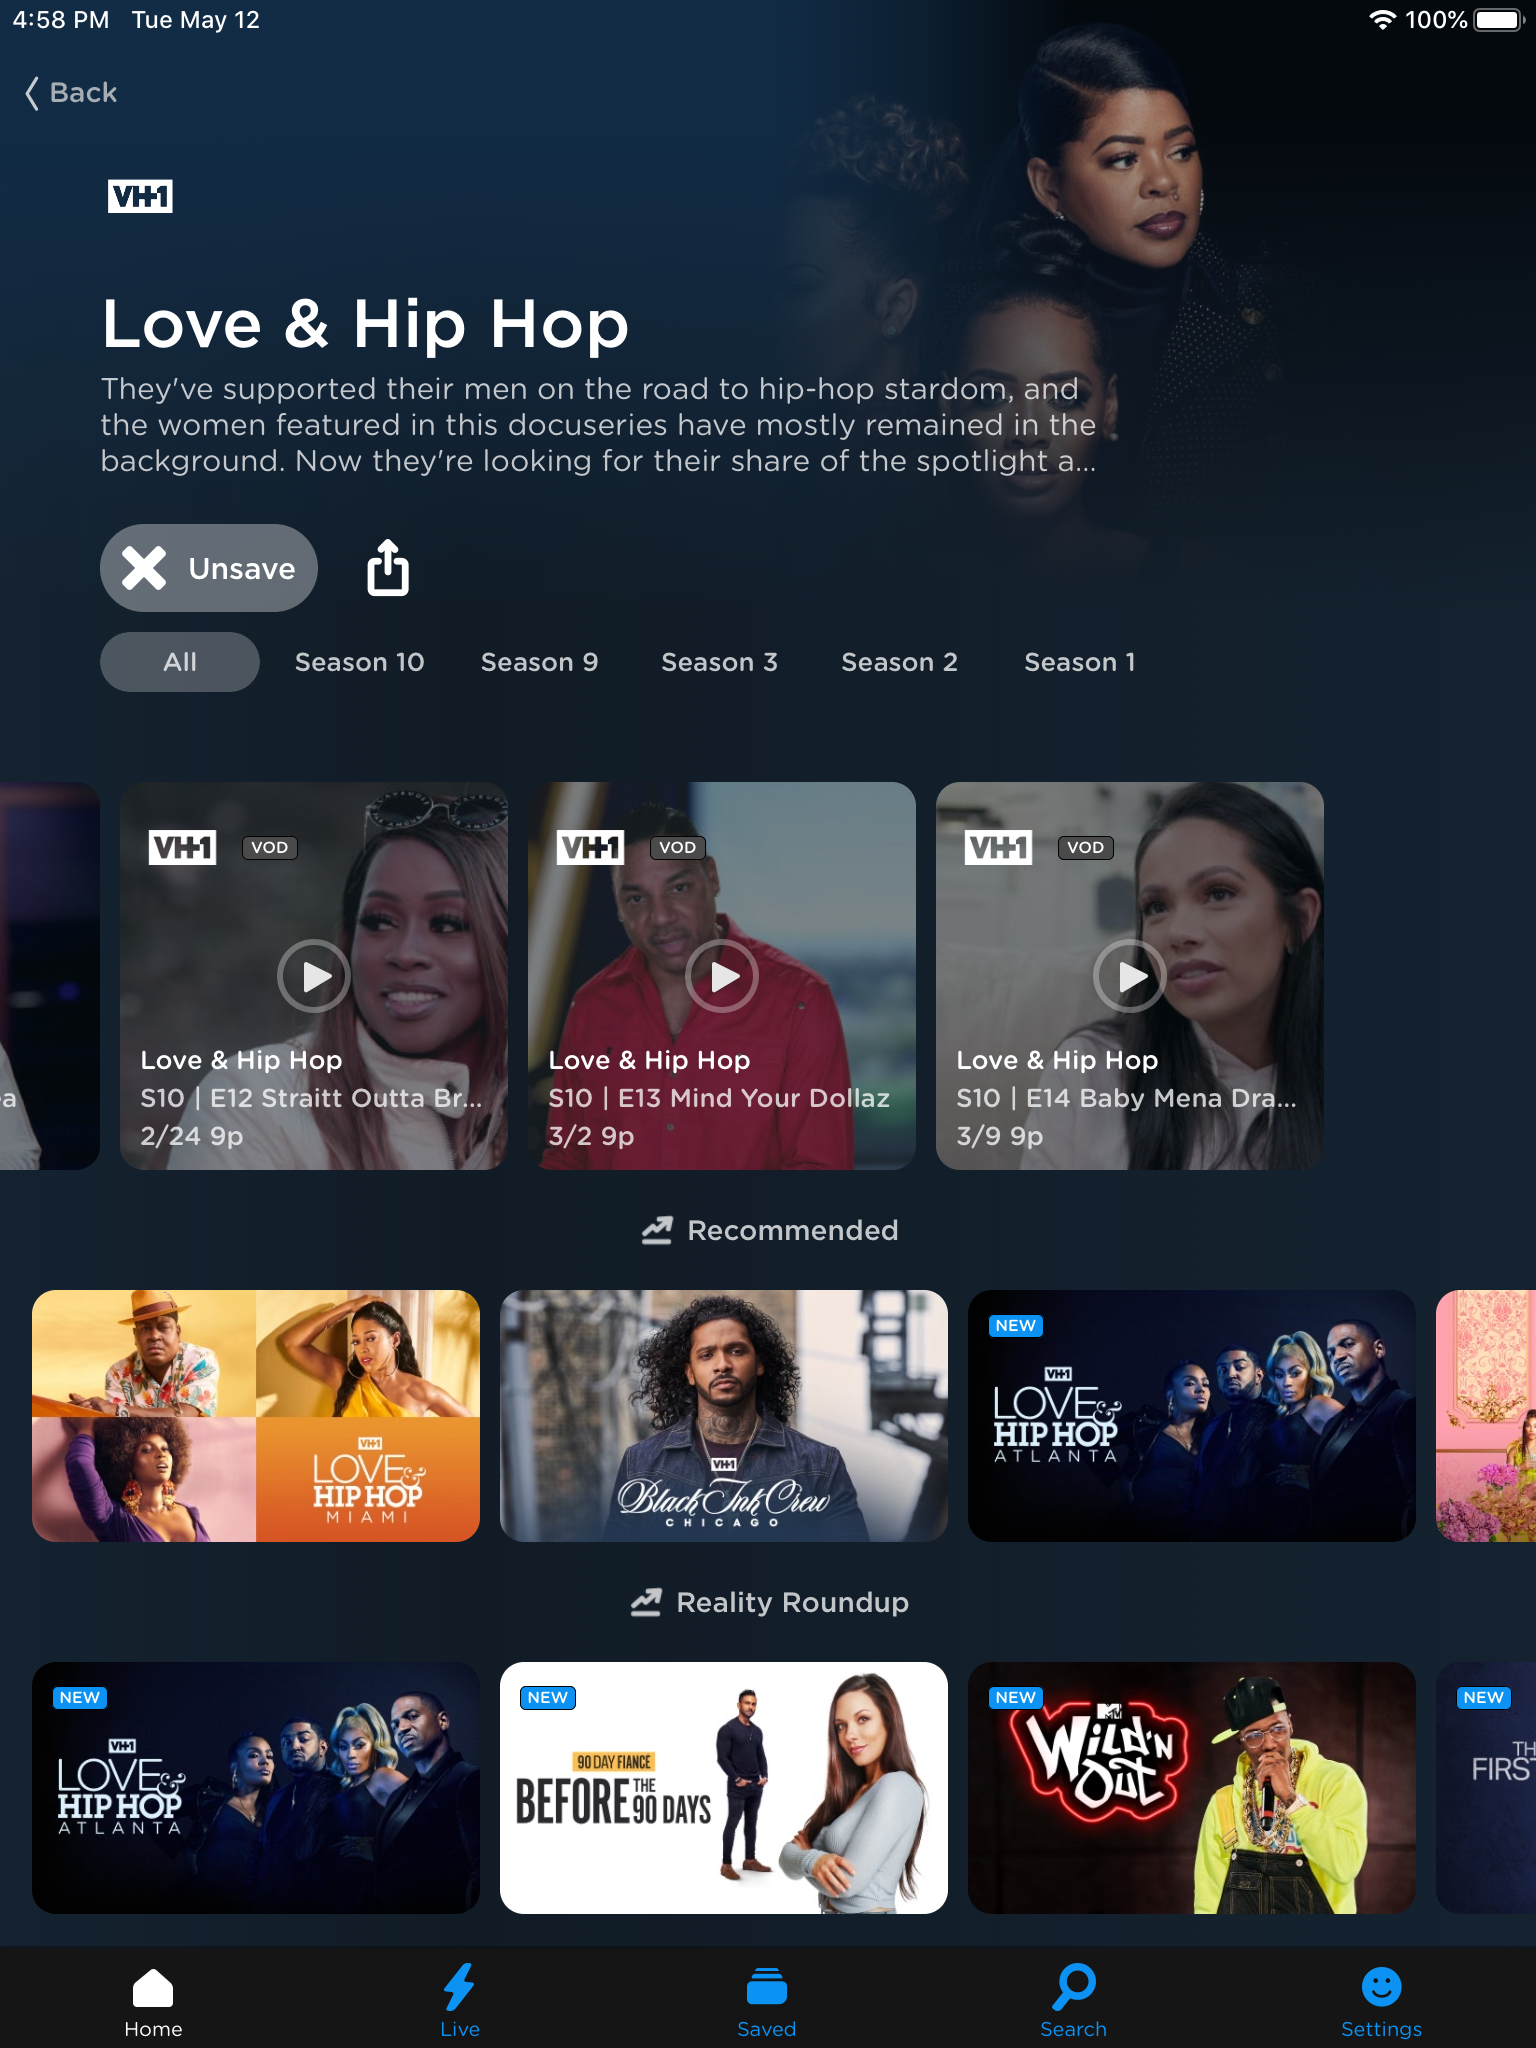 'Screenshot of Philo Show Guide for "Love and Hip Hop: Hollywood" on iPad'